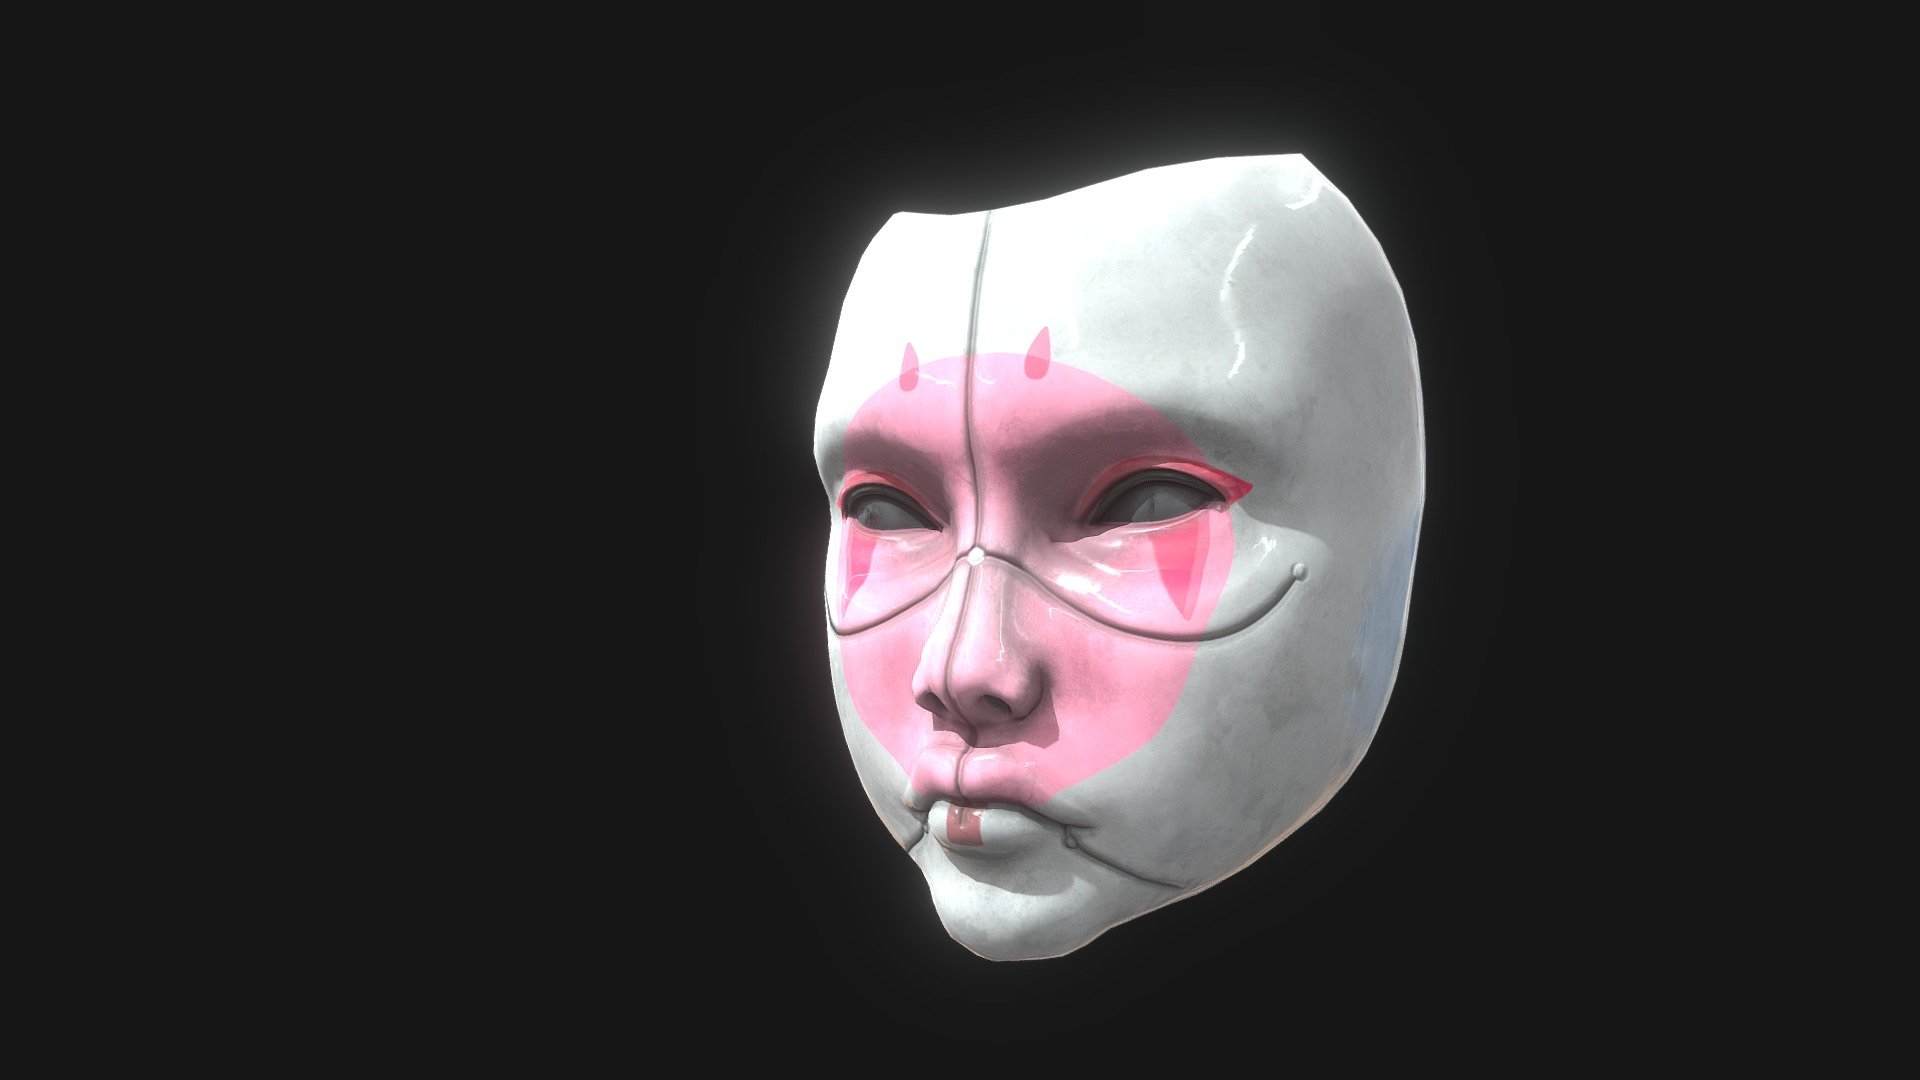 A stern Geisha Mask!

Designed for games in Low-poly PBR including Albedo, Normal, Metallic, AO, and Roughness 2K textures.

This model from Ferocious Industries can be found in 3 different material skins, and this one uses the ‘Dusty’ texture set.

3972 Triangles 3d model